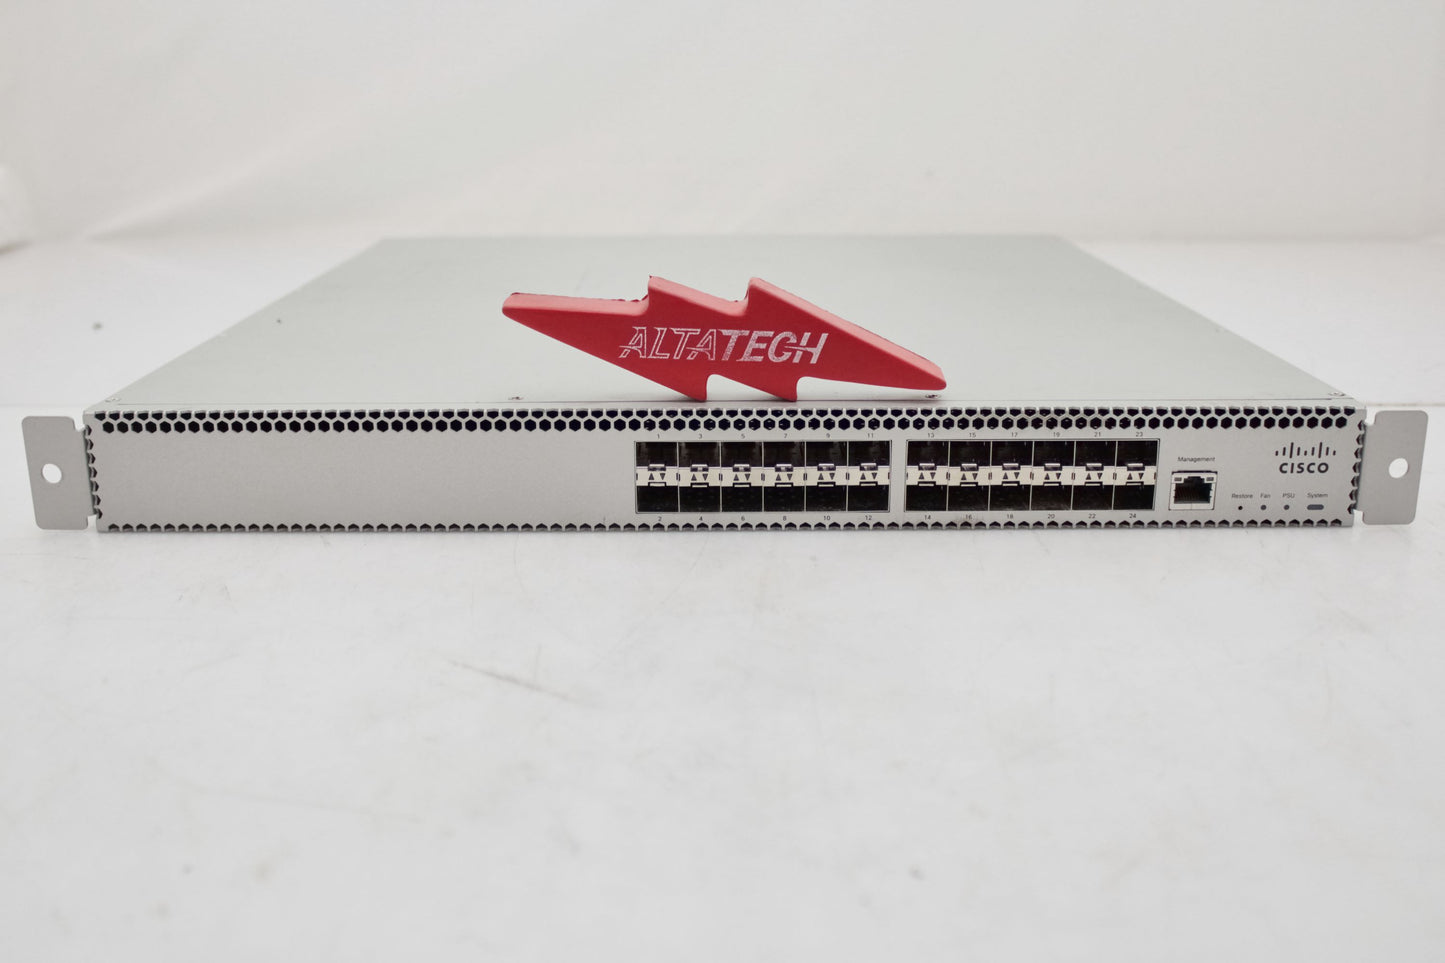 Cisco MS420-24-HW *UNCLAIMED* Meraki MS420 24 Port Cloud Managed Aggregation Switch, Used